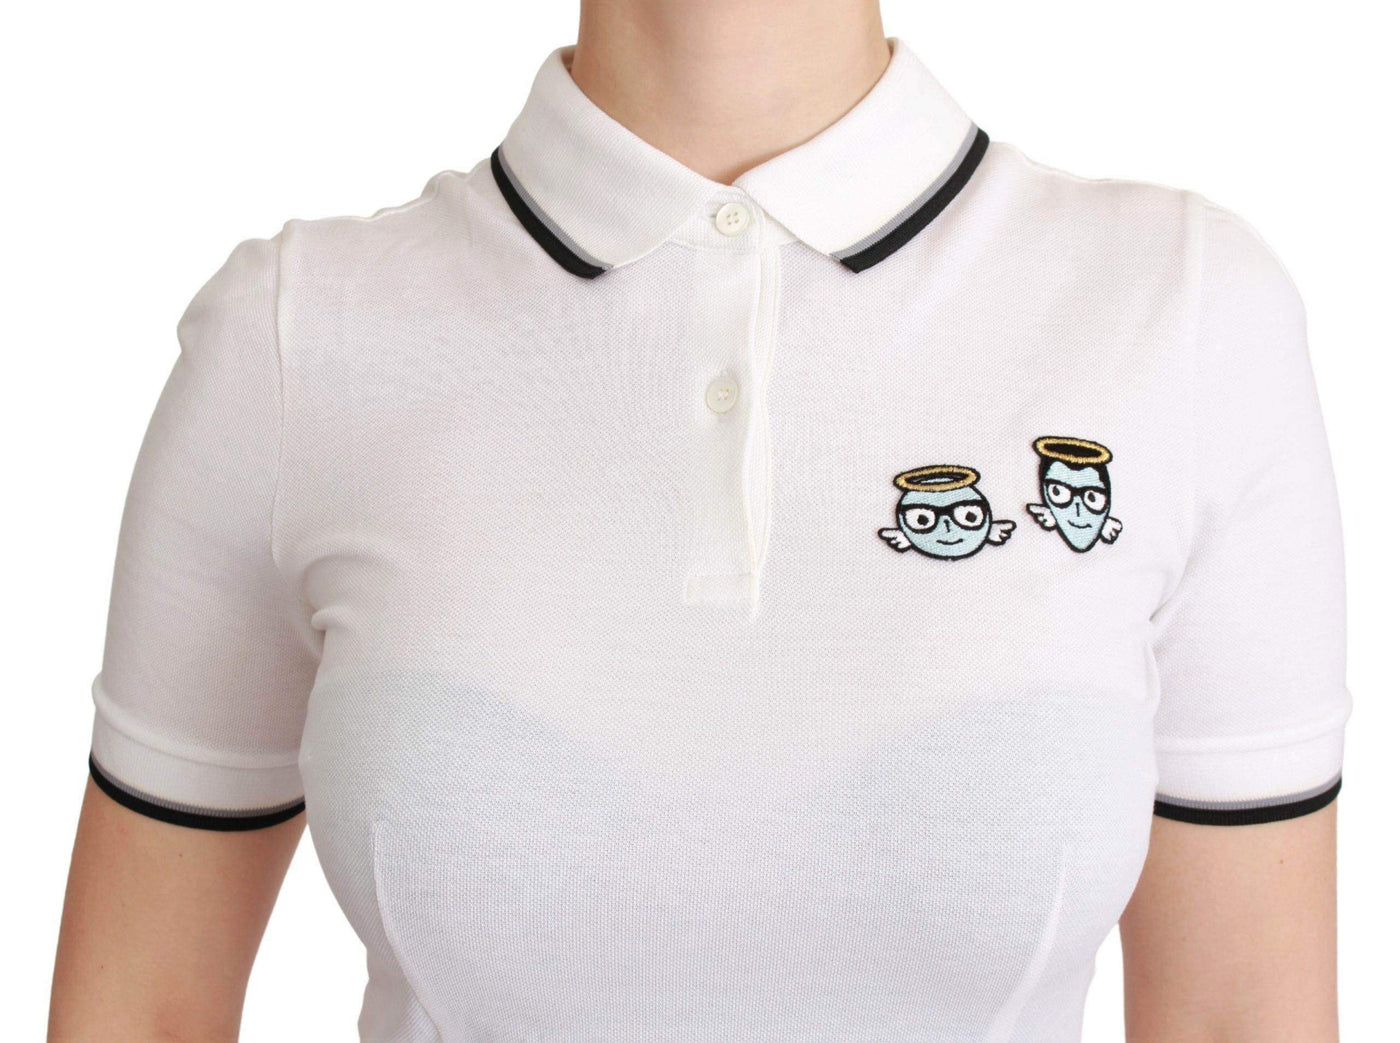 Dolce & Gabbana White Cotton Polo #dgfamily T-shirt #women, Brand_Dolce & Gabbana, Catch, Dolce & Gabbana, feed-agegroup-adult, feed-color-white, feed-gender-female, feed-size-IT36 | XS, feed-size-IT38 | S, feed-size-IT40|S, feed-size-IT46|XL, feed-size-IT48|XXL, Gender_Women, IT36 | XS, IT38 | S, IT40|S, IT42|M, IT44|L, IT46|XL, IT48|XXL, Kogan, Tops & T-Shirts - Women - Clothing, White, Women - New Arrivals at SEYMAYKA